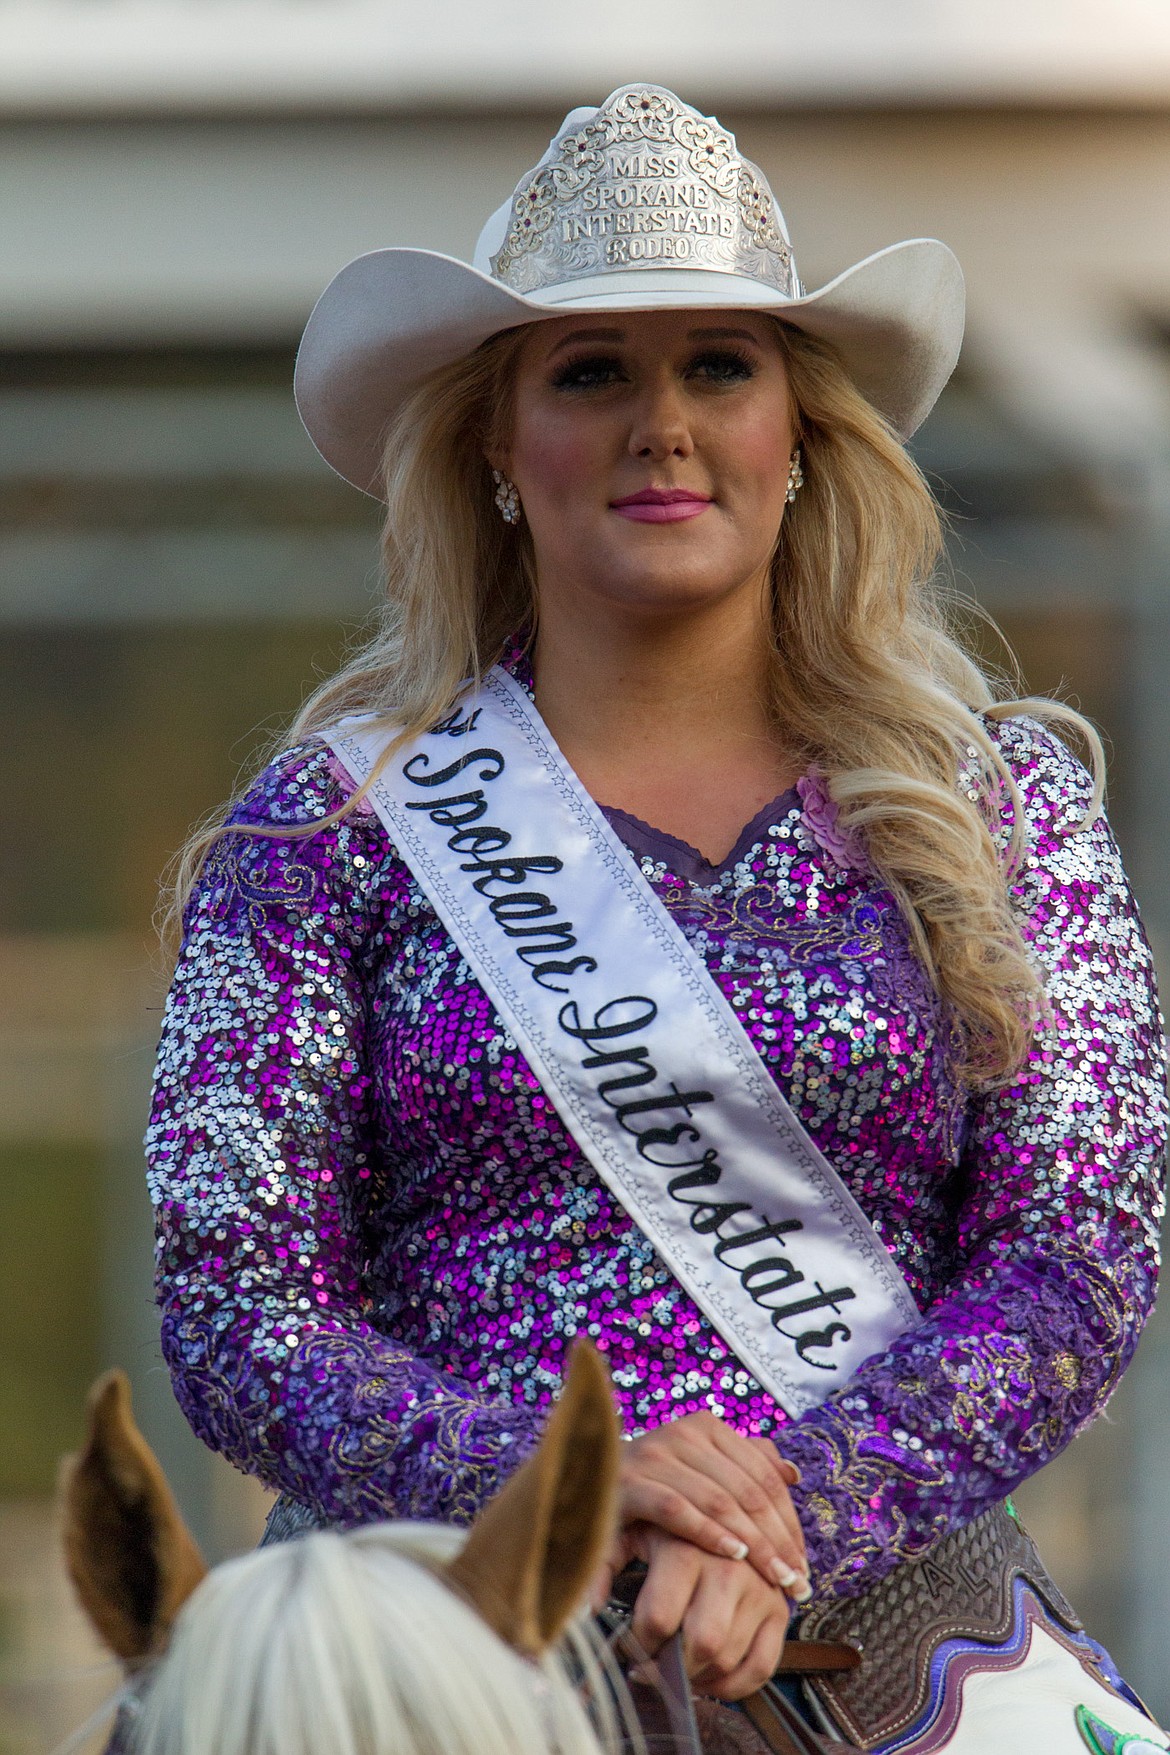 Ashley Lentz, Miss Spokane Interstate Rodeo Queen, attends the rodeo in Libby Saturday, Aug. 5. (John Blodgett/The Western News)